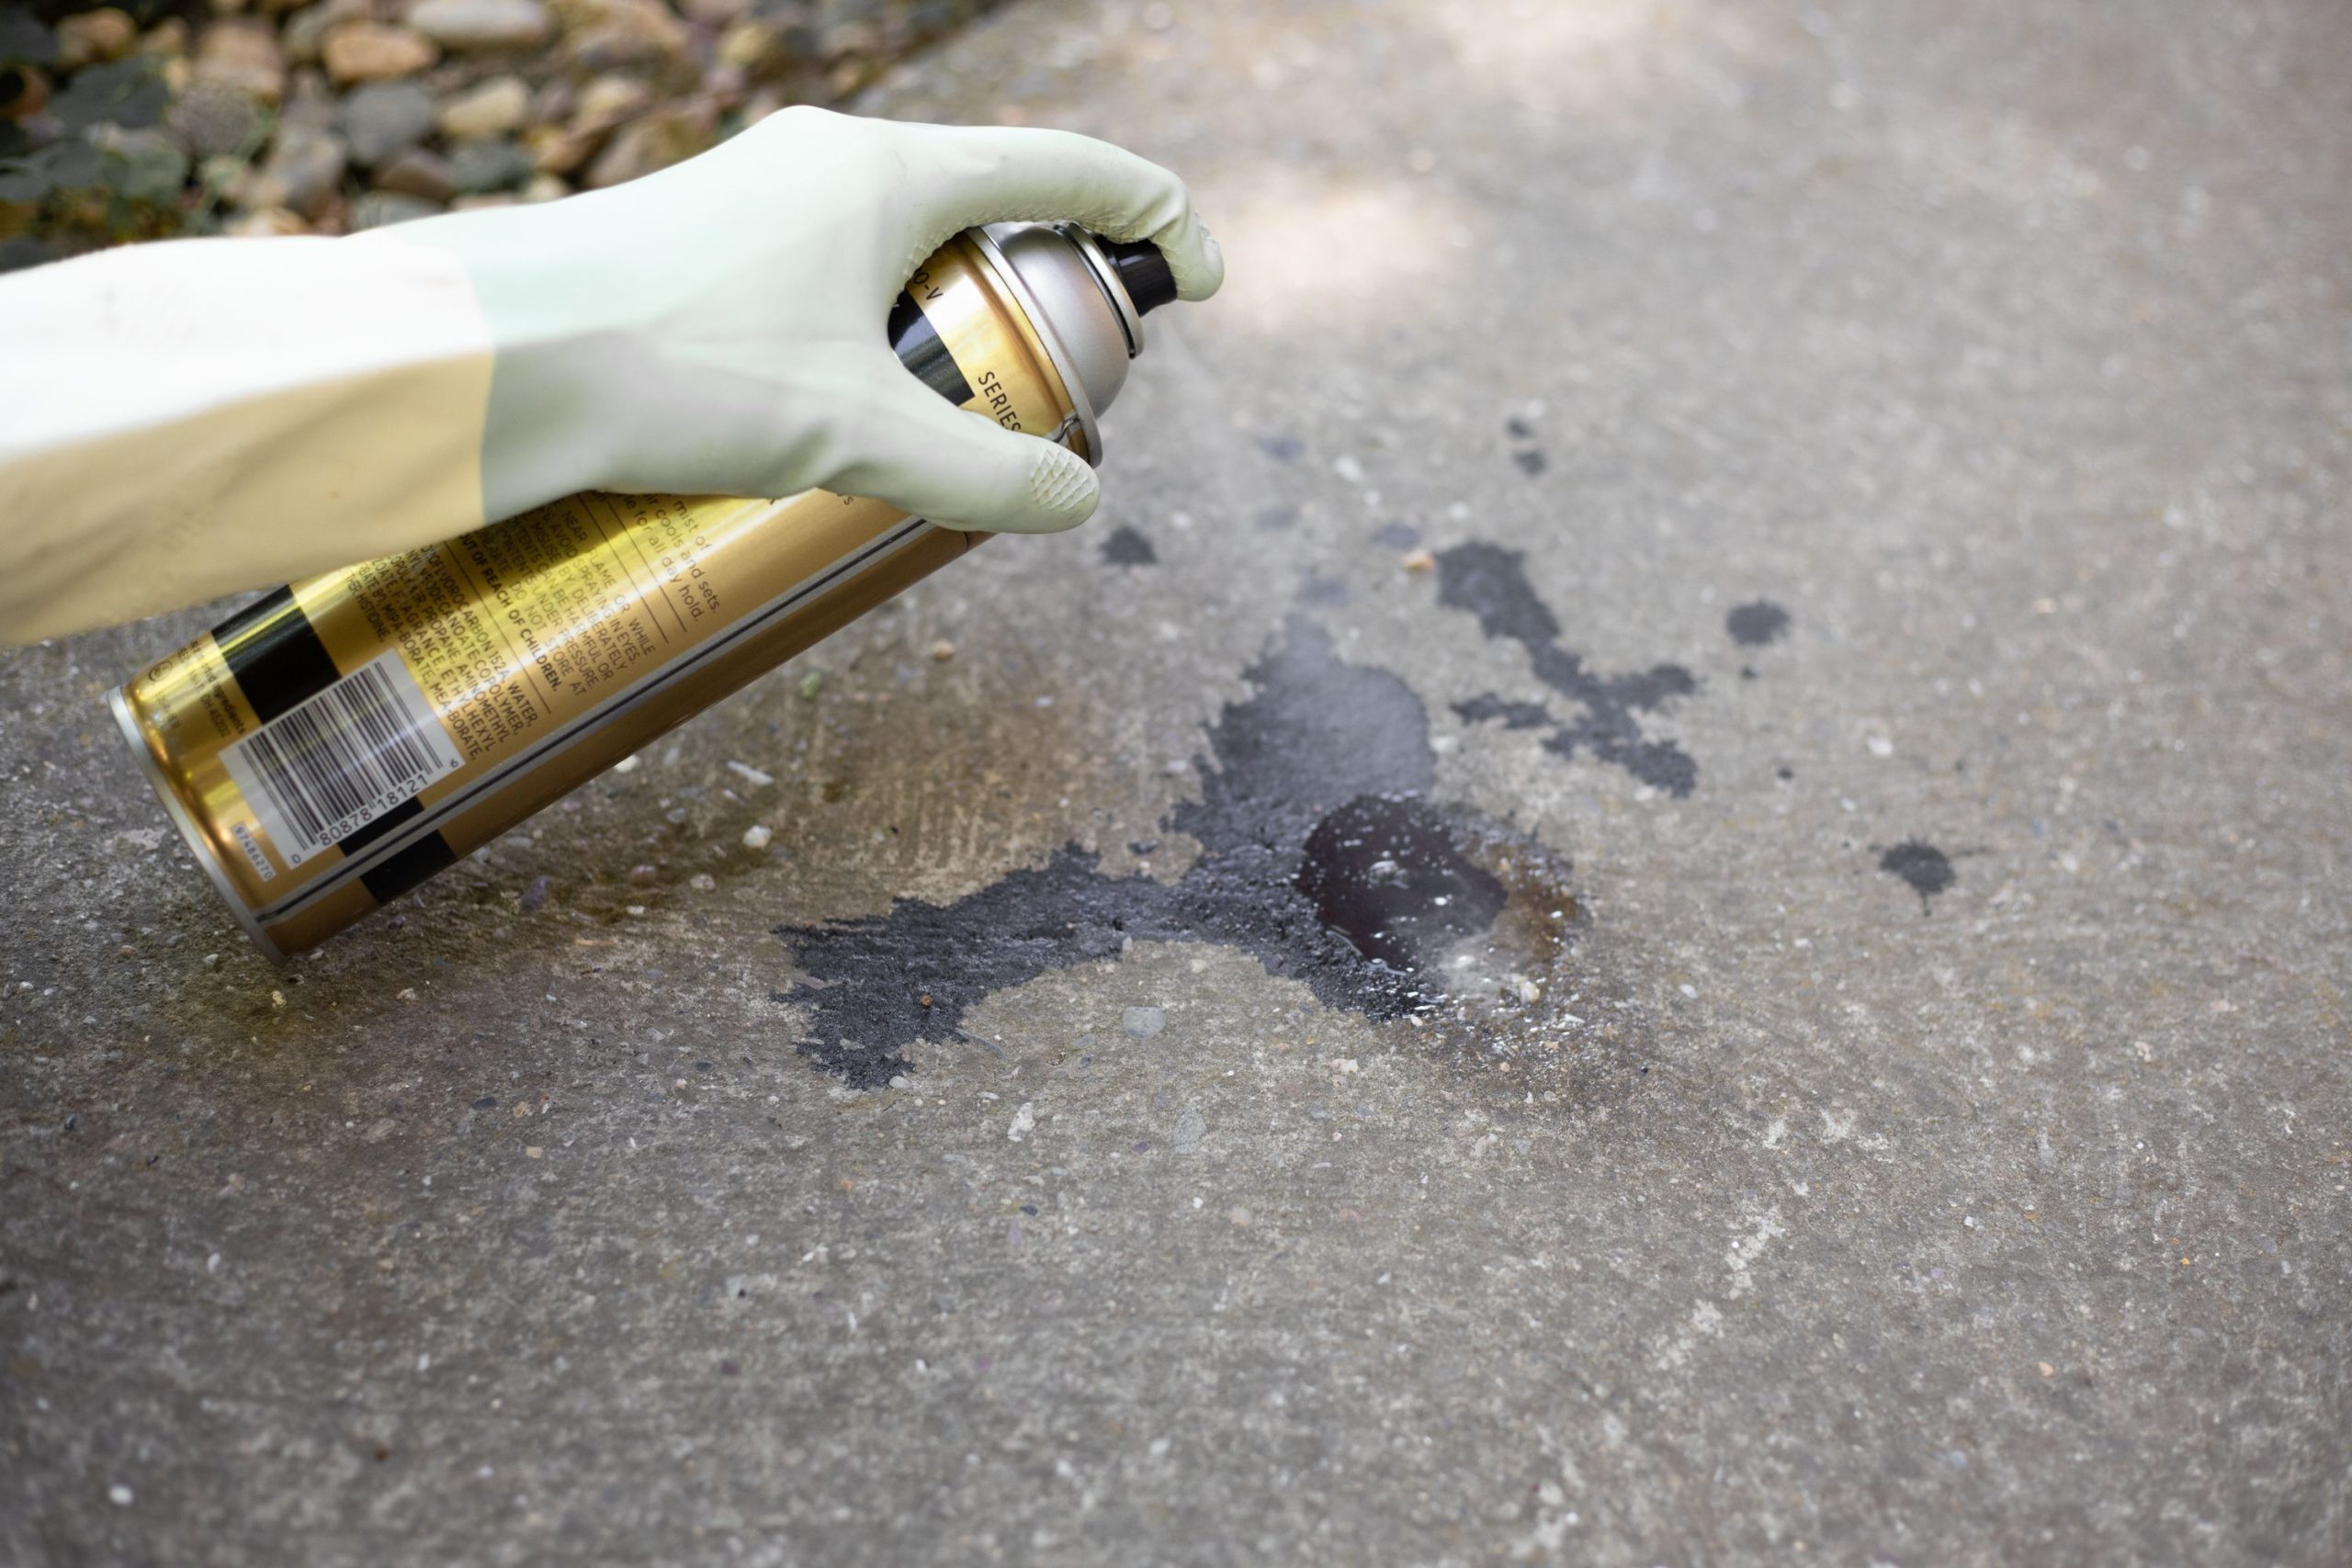 Precautions and Warnings While Removing Old Oil Stains